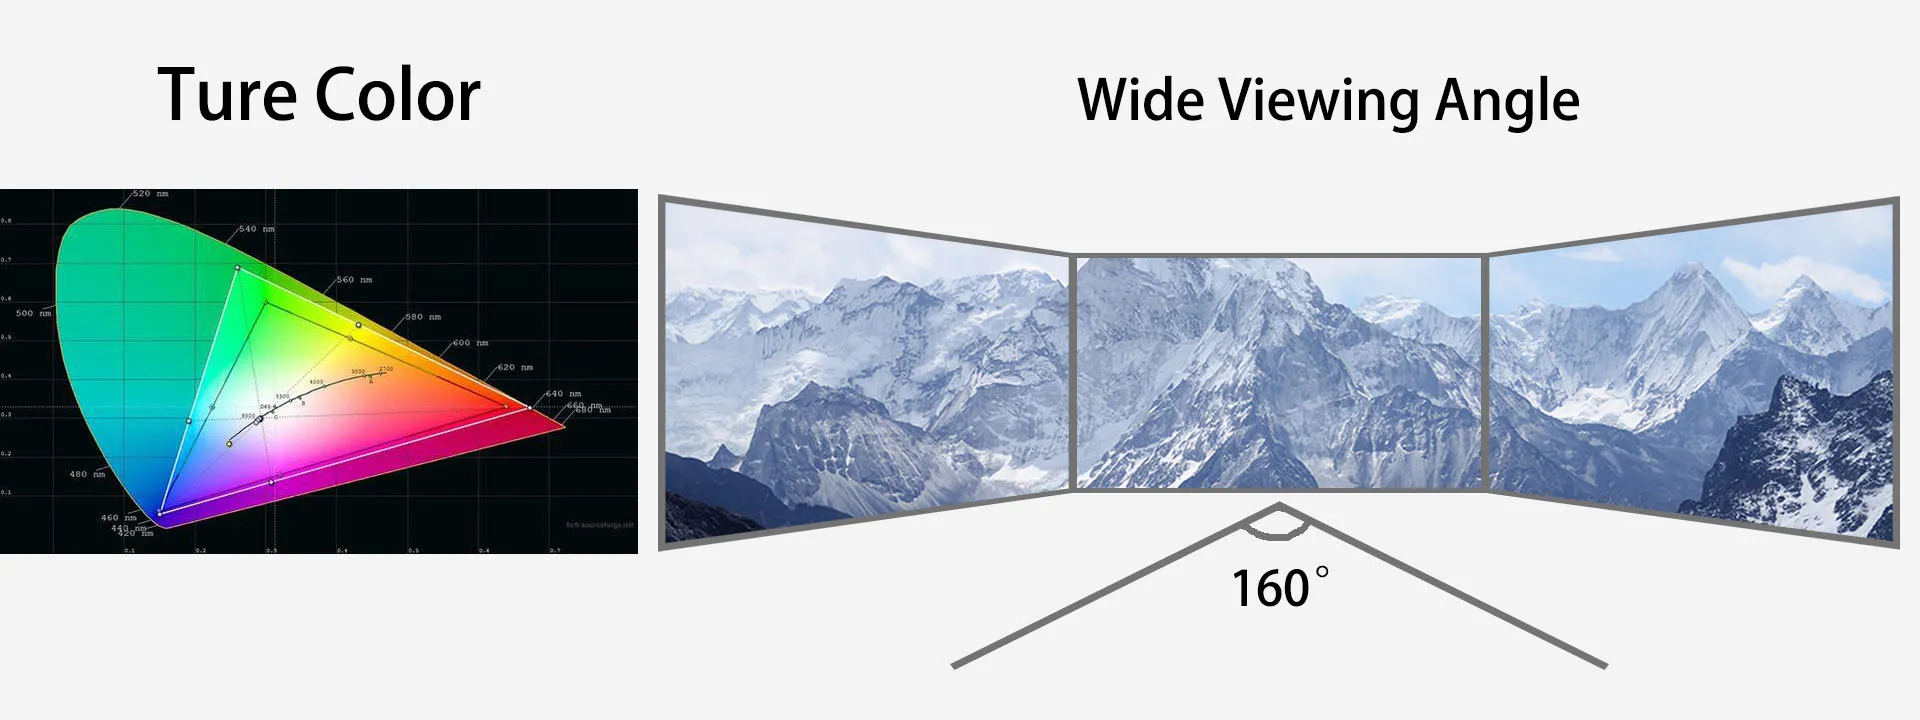 Akra-indoor-led-screen-viewing angle